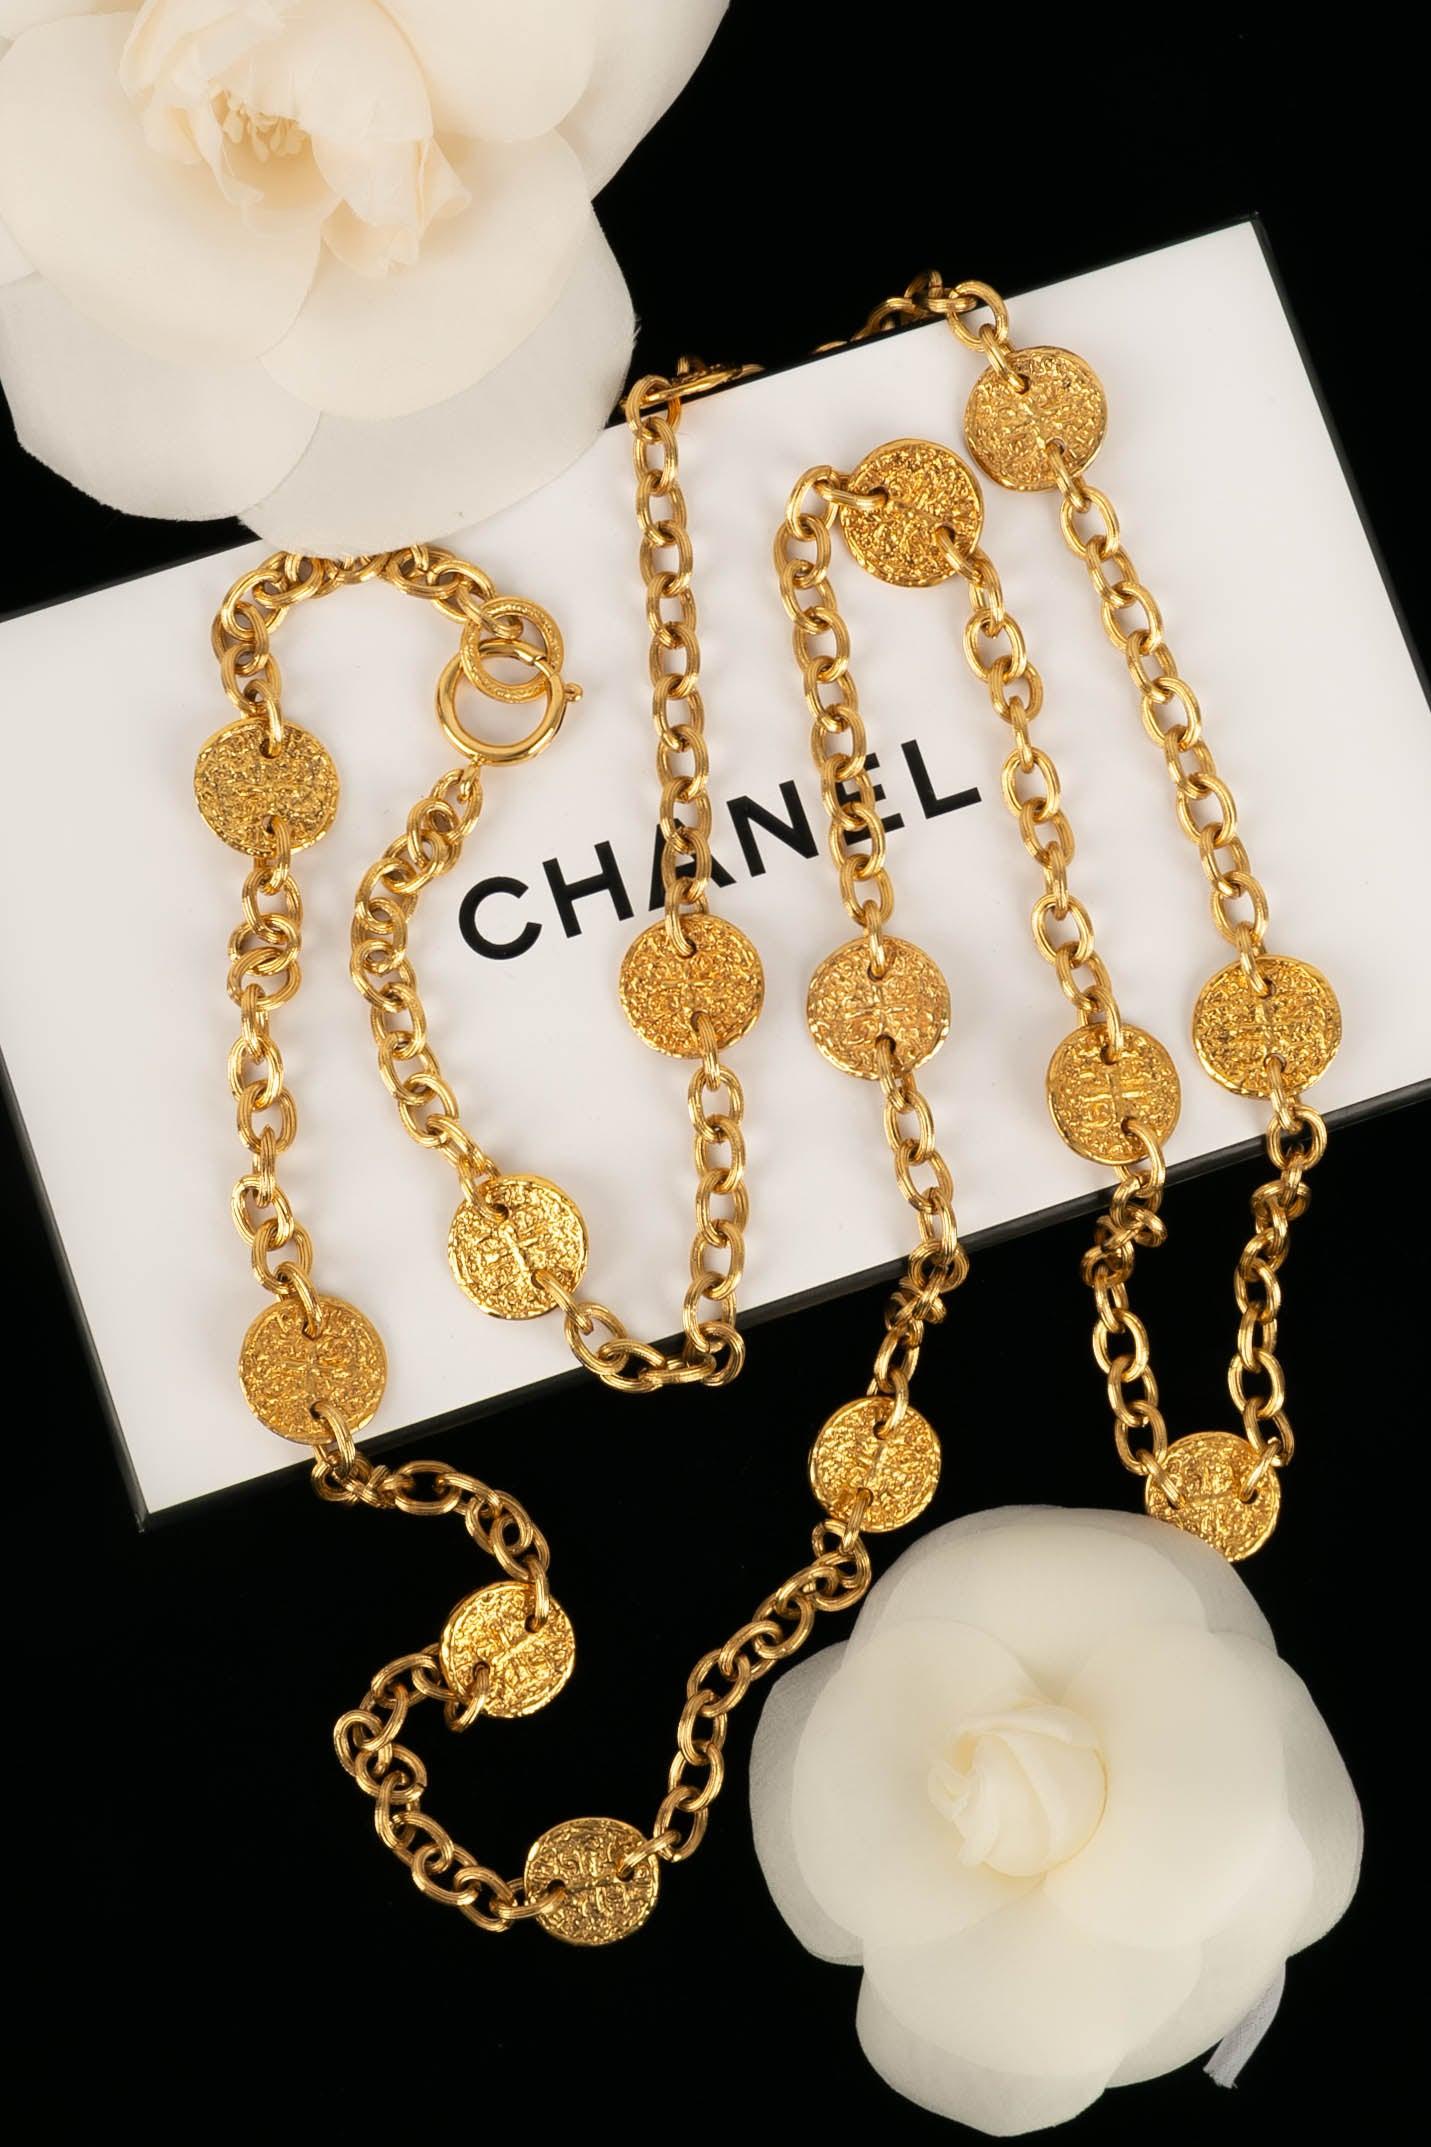 Chanel Necklace in Gold Metal Chain and Medals For Sale 4